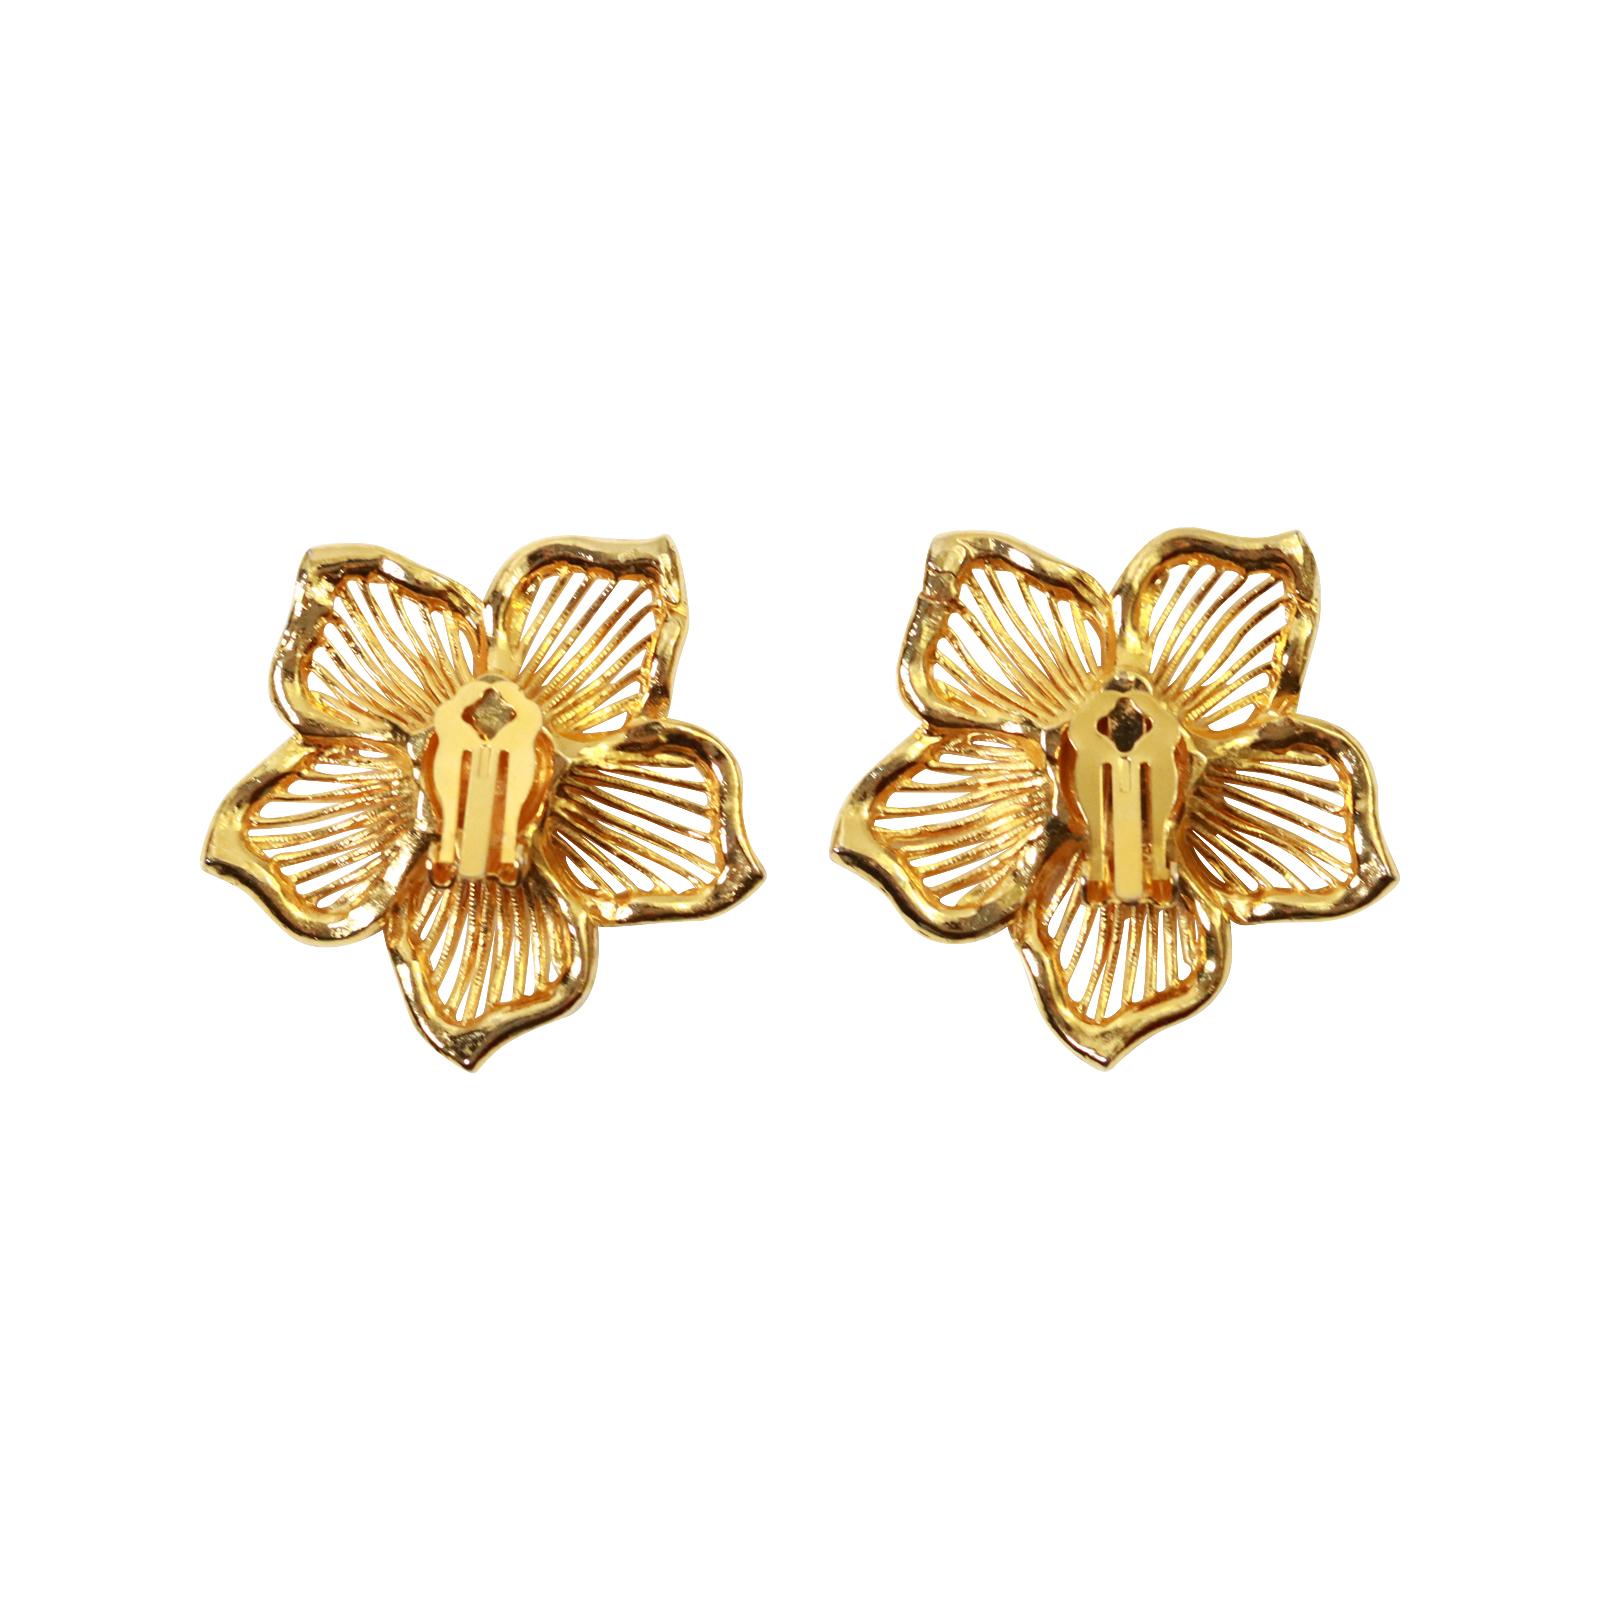 Modern Vintage Gold Tone and Diamante Flower Earrings, Circa 1980's For Sale